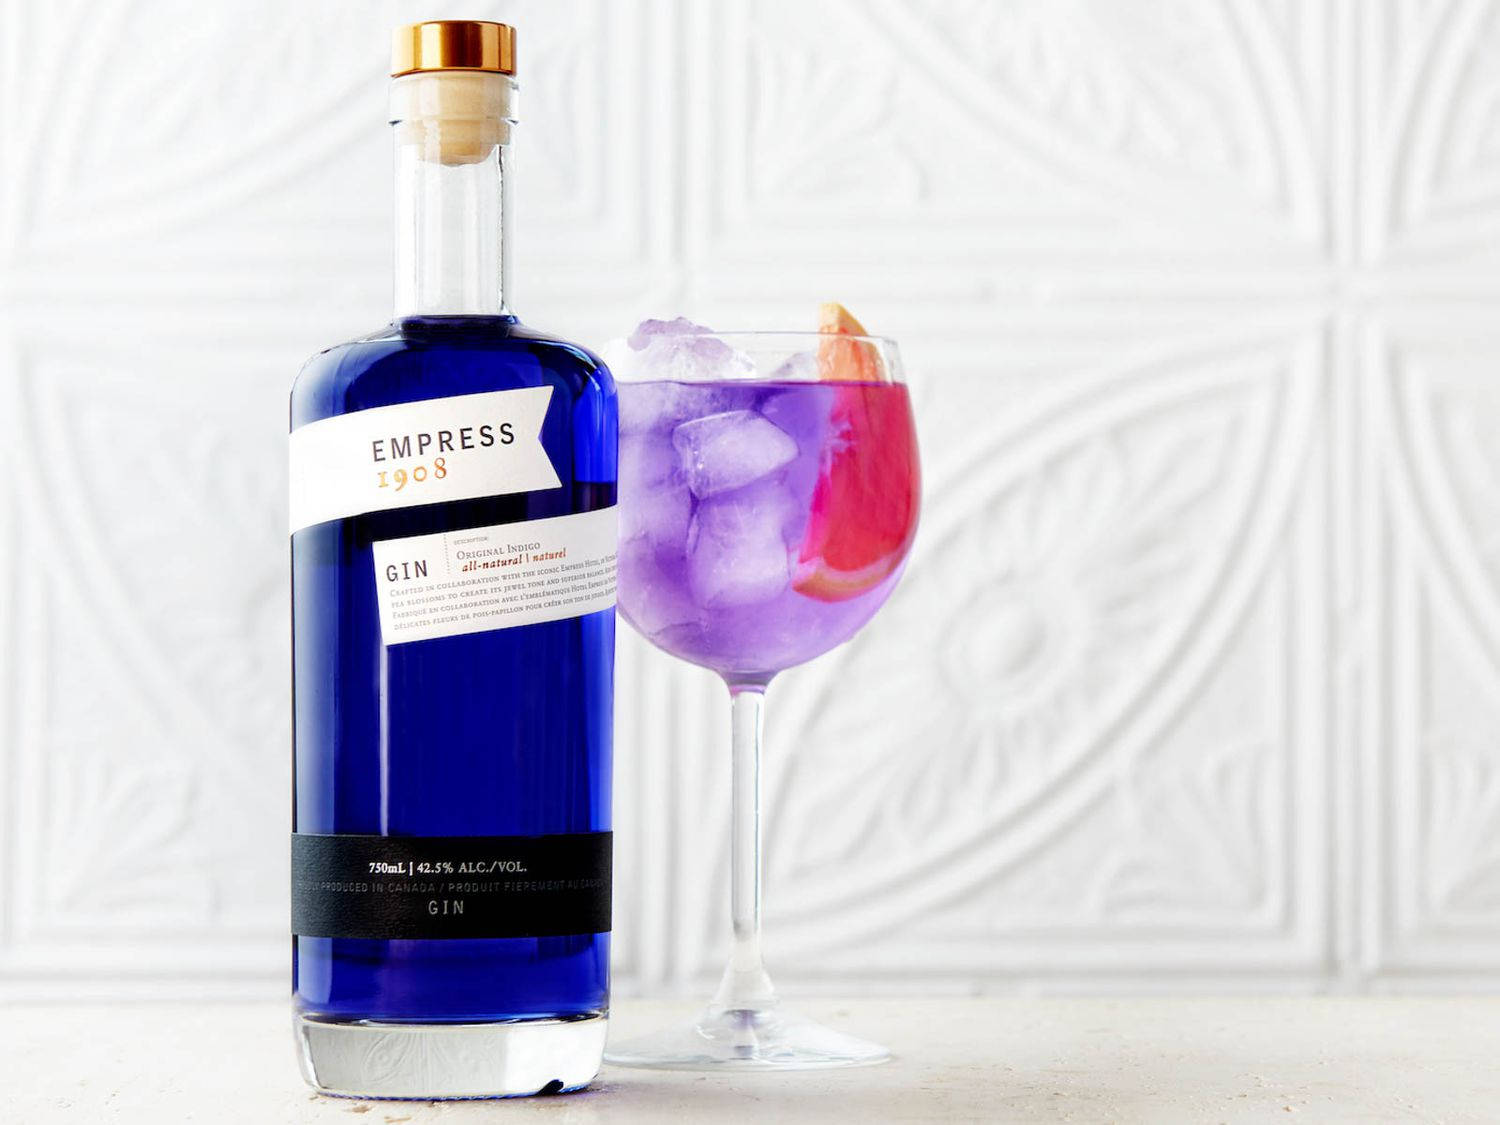 Empress 1908 Gin With A Glass Of Icy Grapefruit Wallpaper